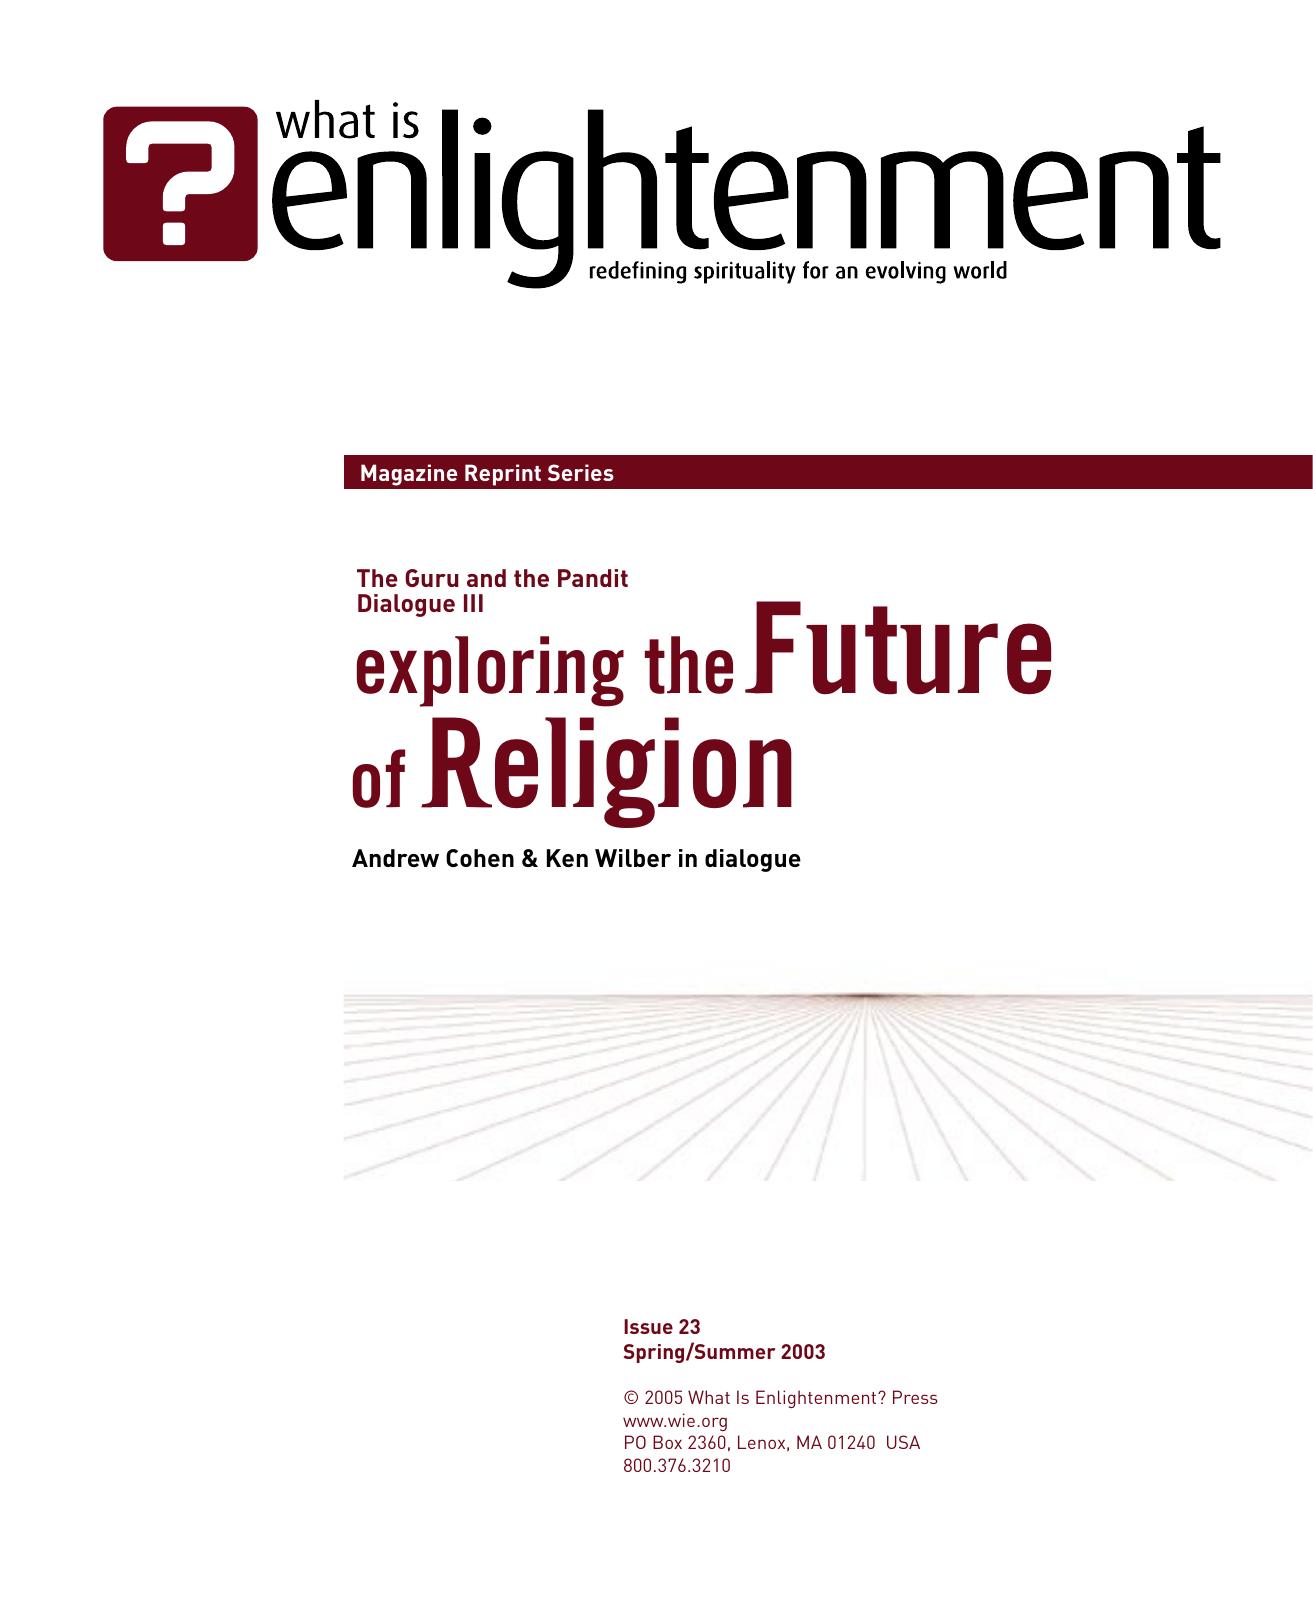 What is Enlightenment - Exploring the Future of Religion